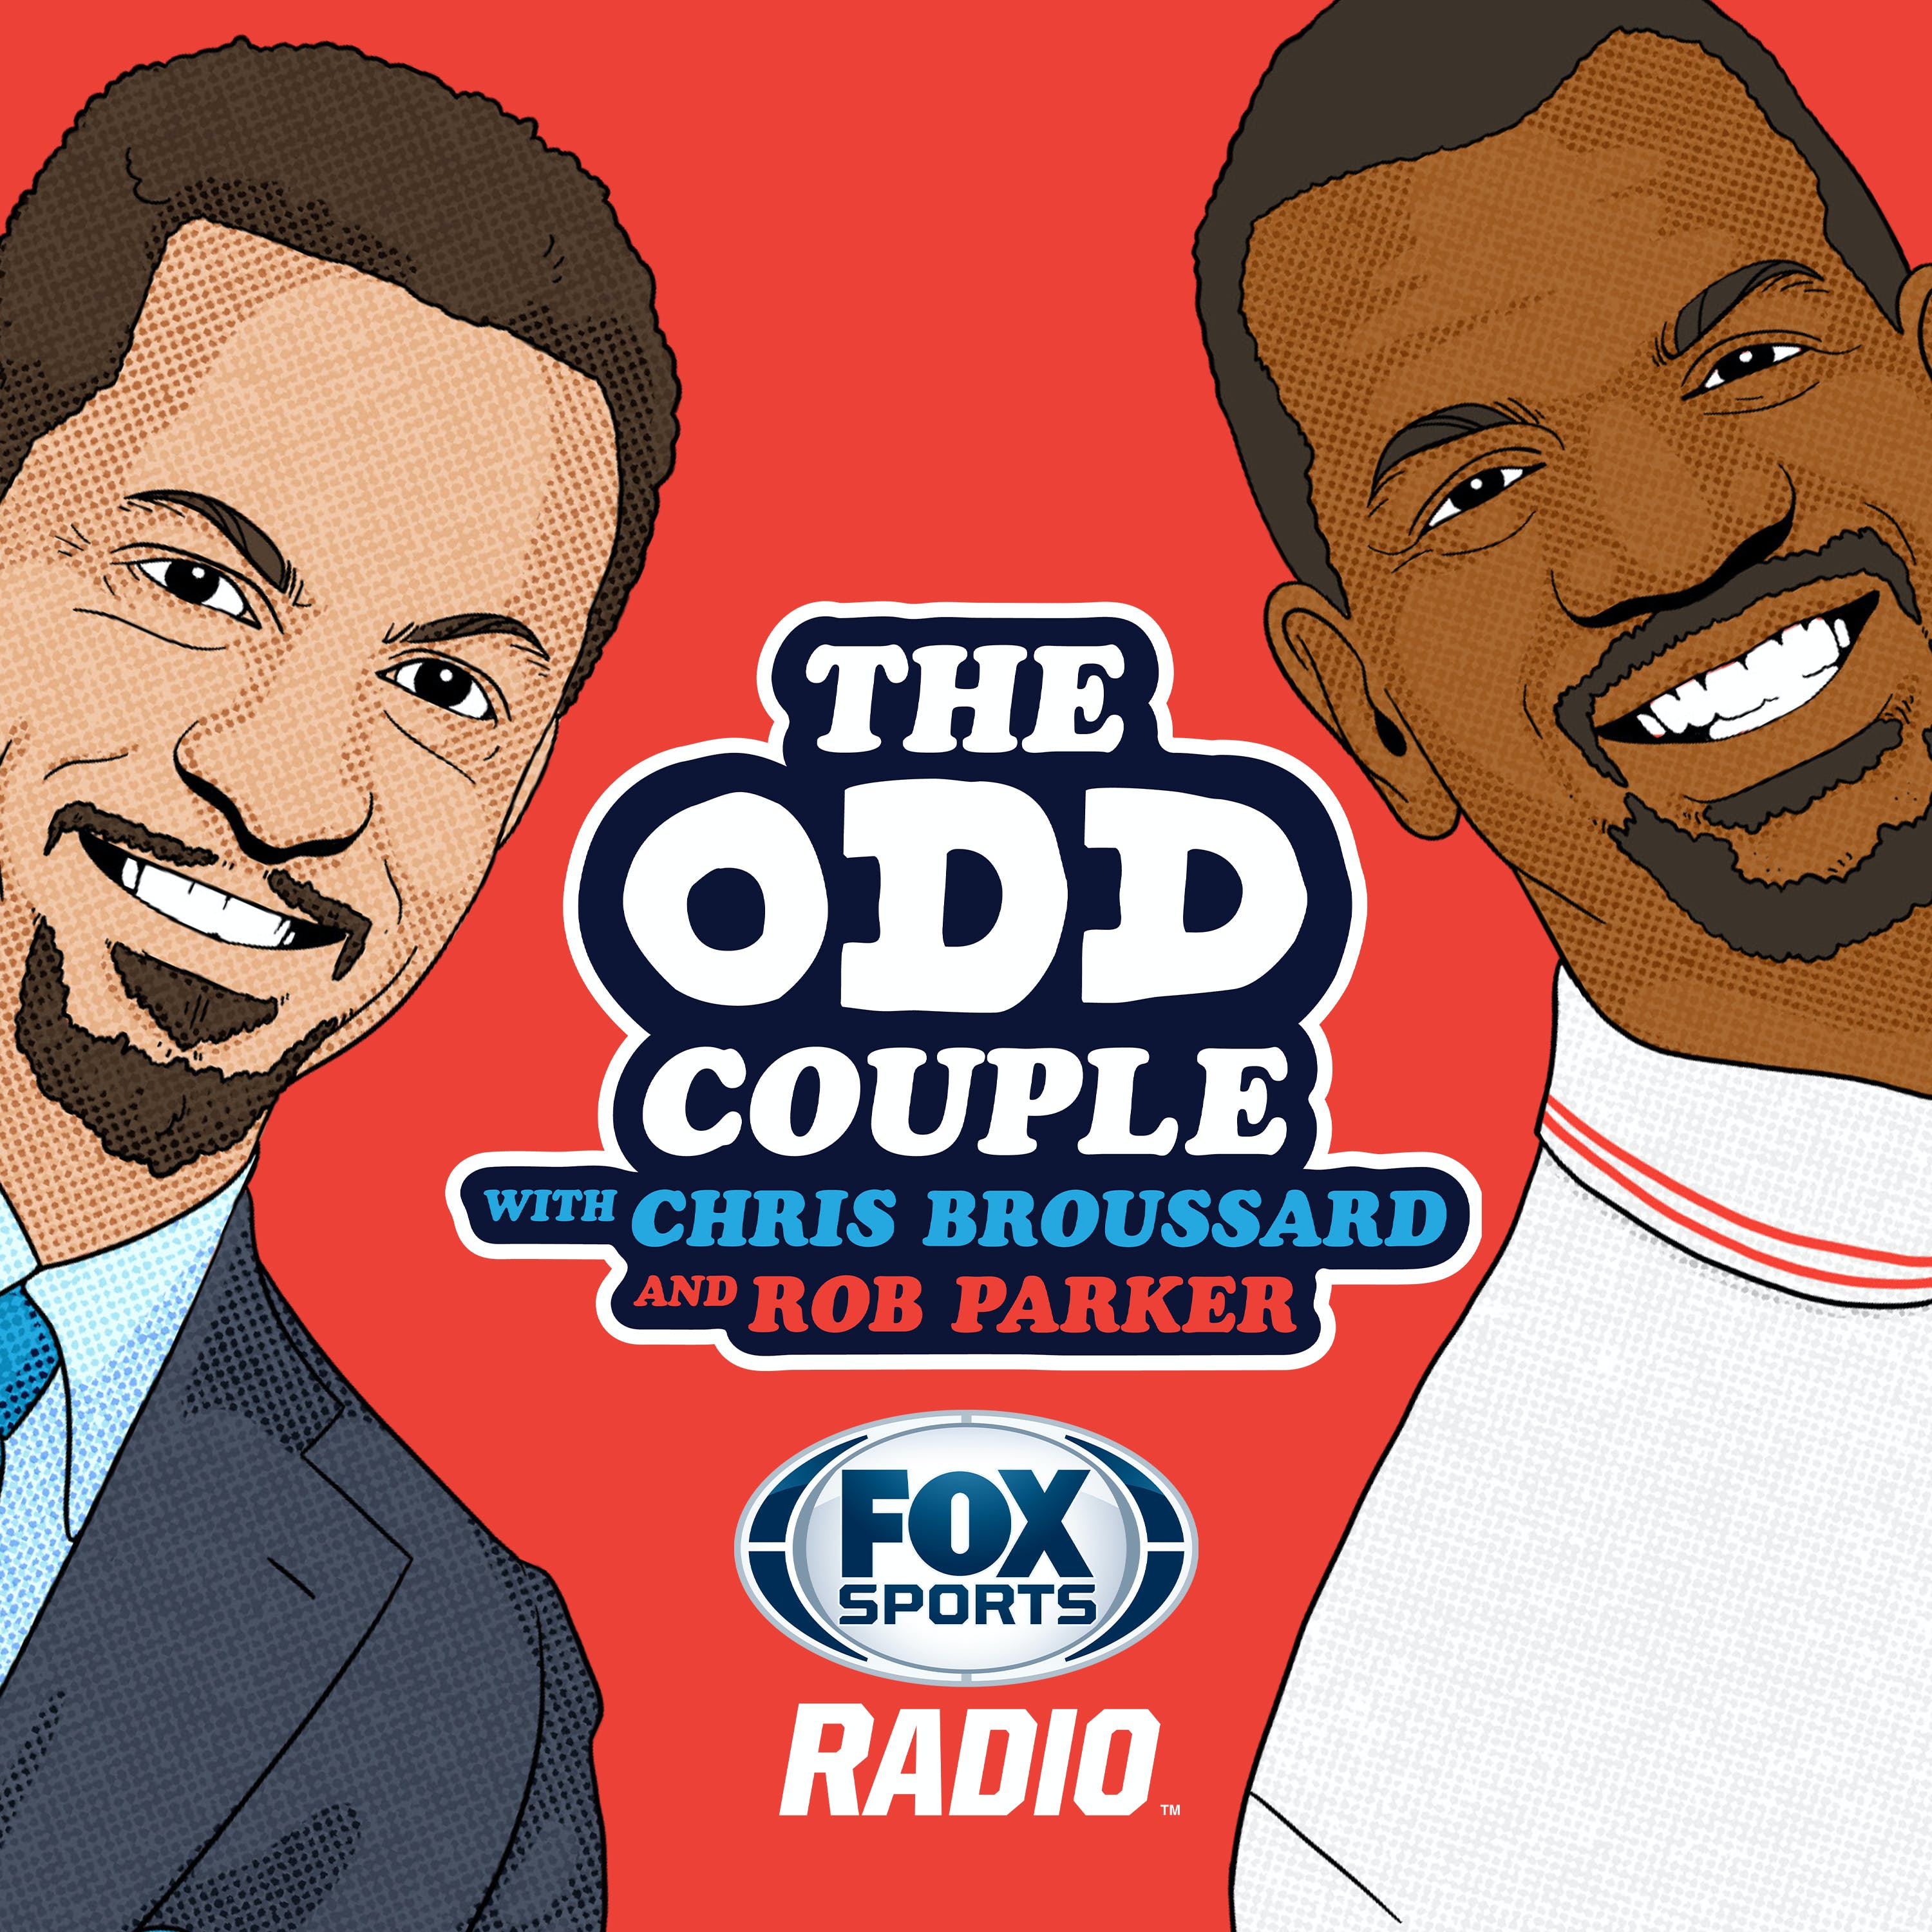 03/10/2022 - Best of The Odd Couple